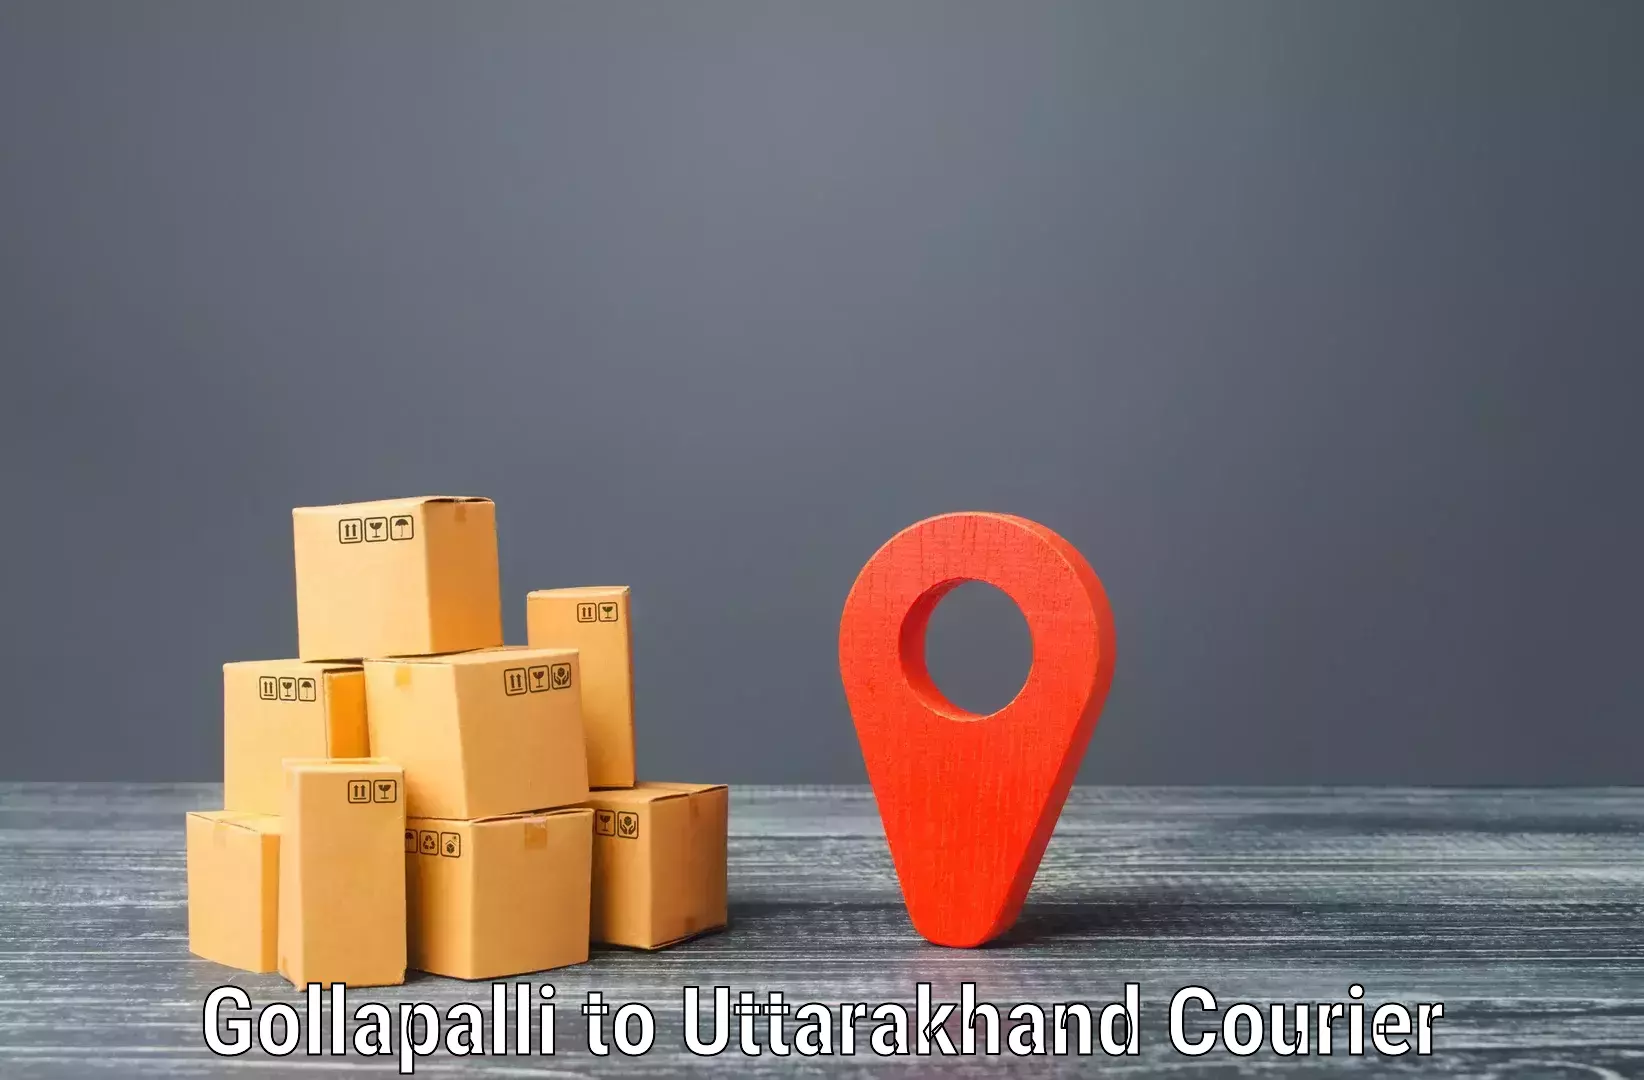 Multi-national courier services Gollapalli to Gairsain